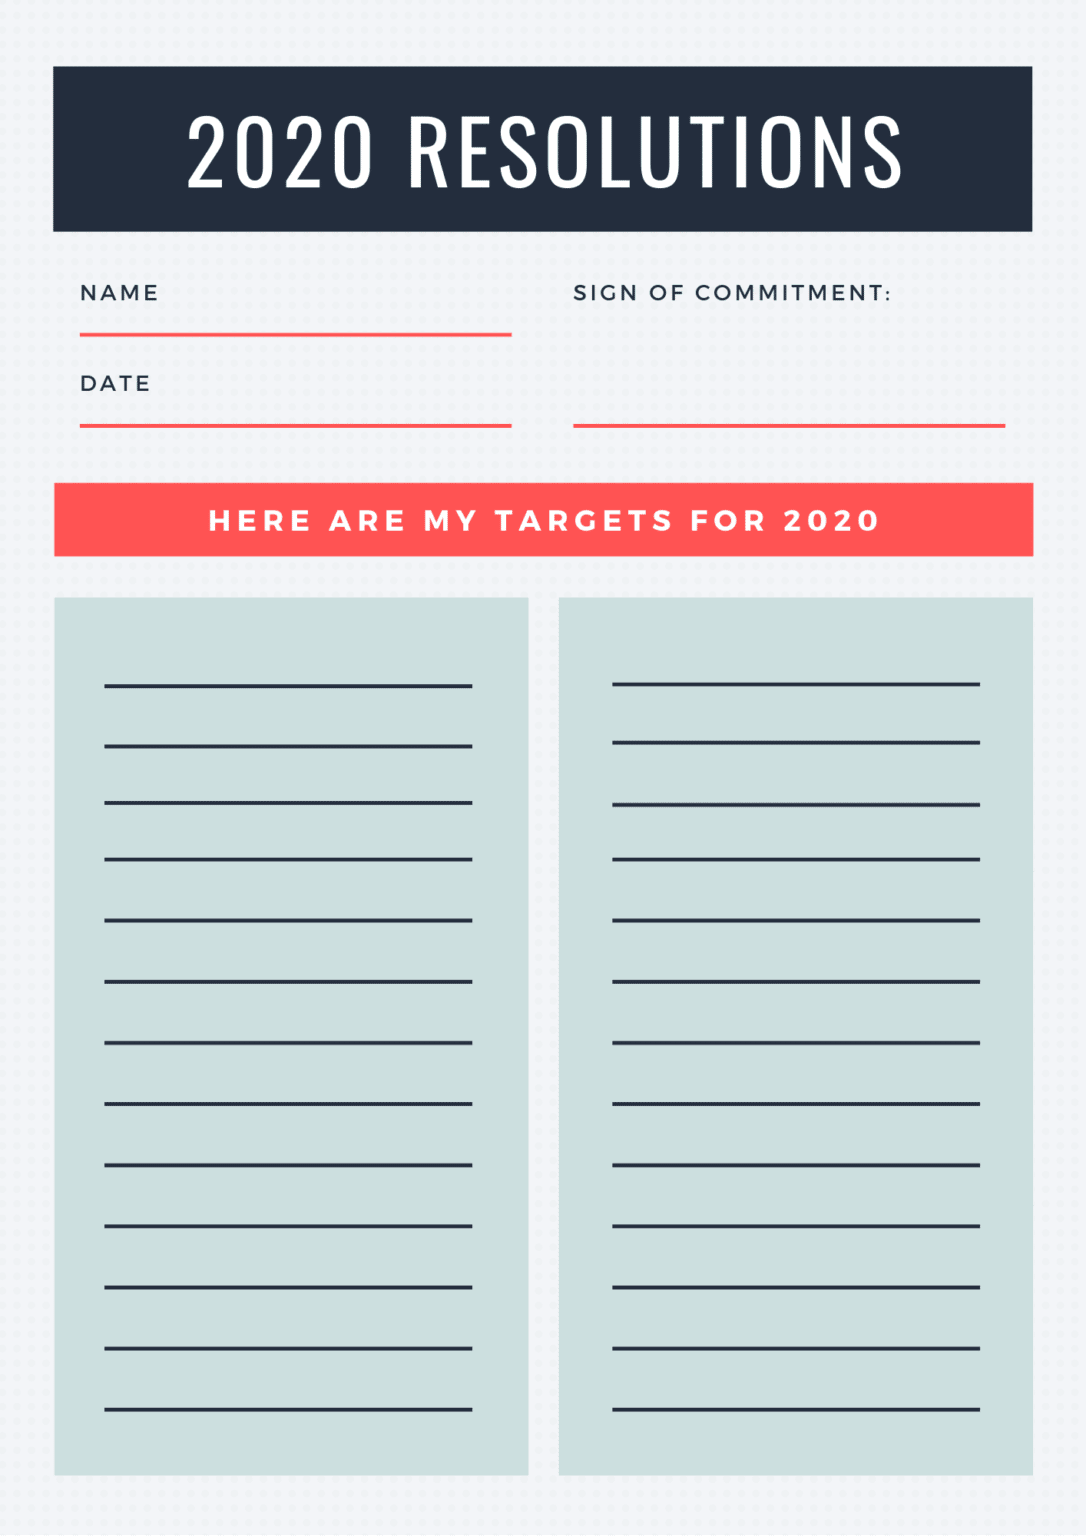 13 Free New Year Resolution Templates You Shouldn't Miss